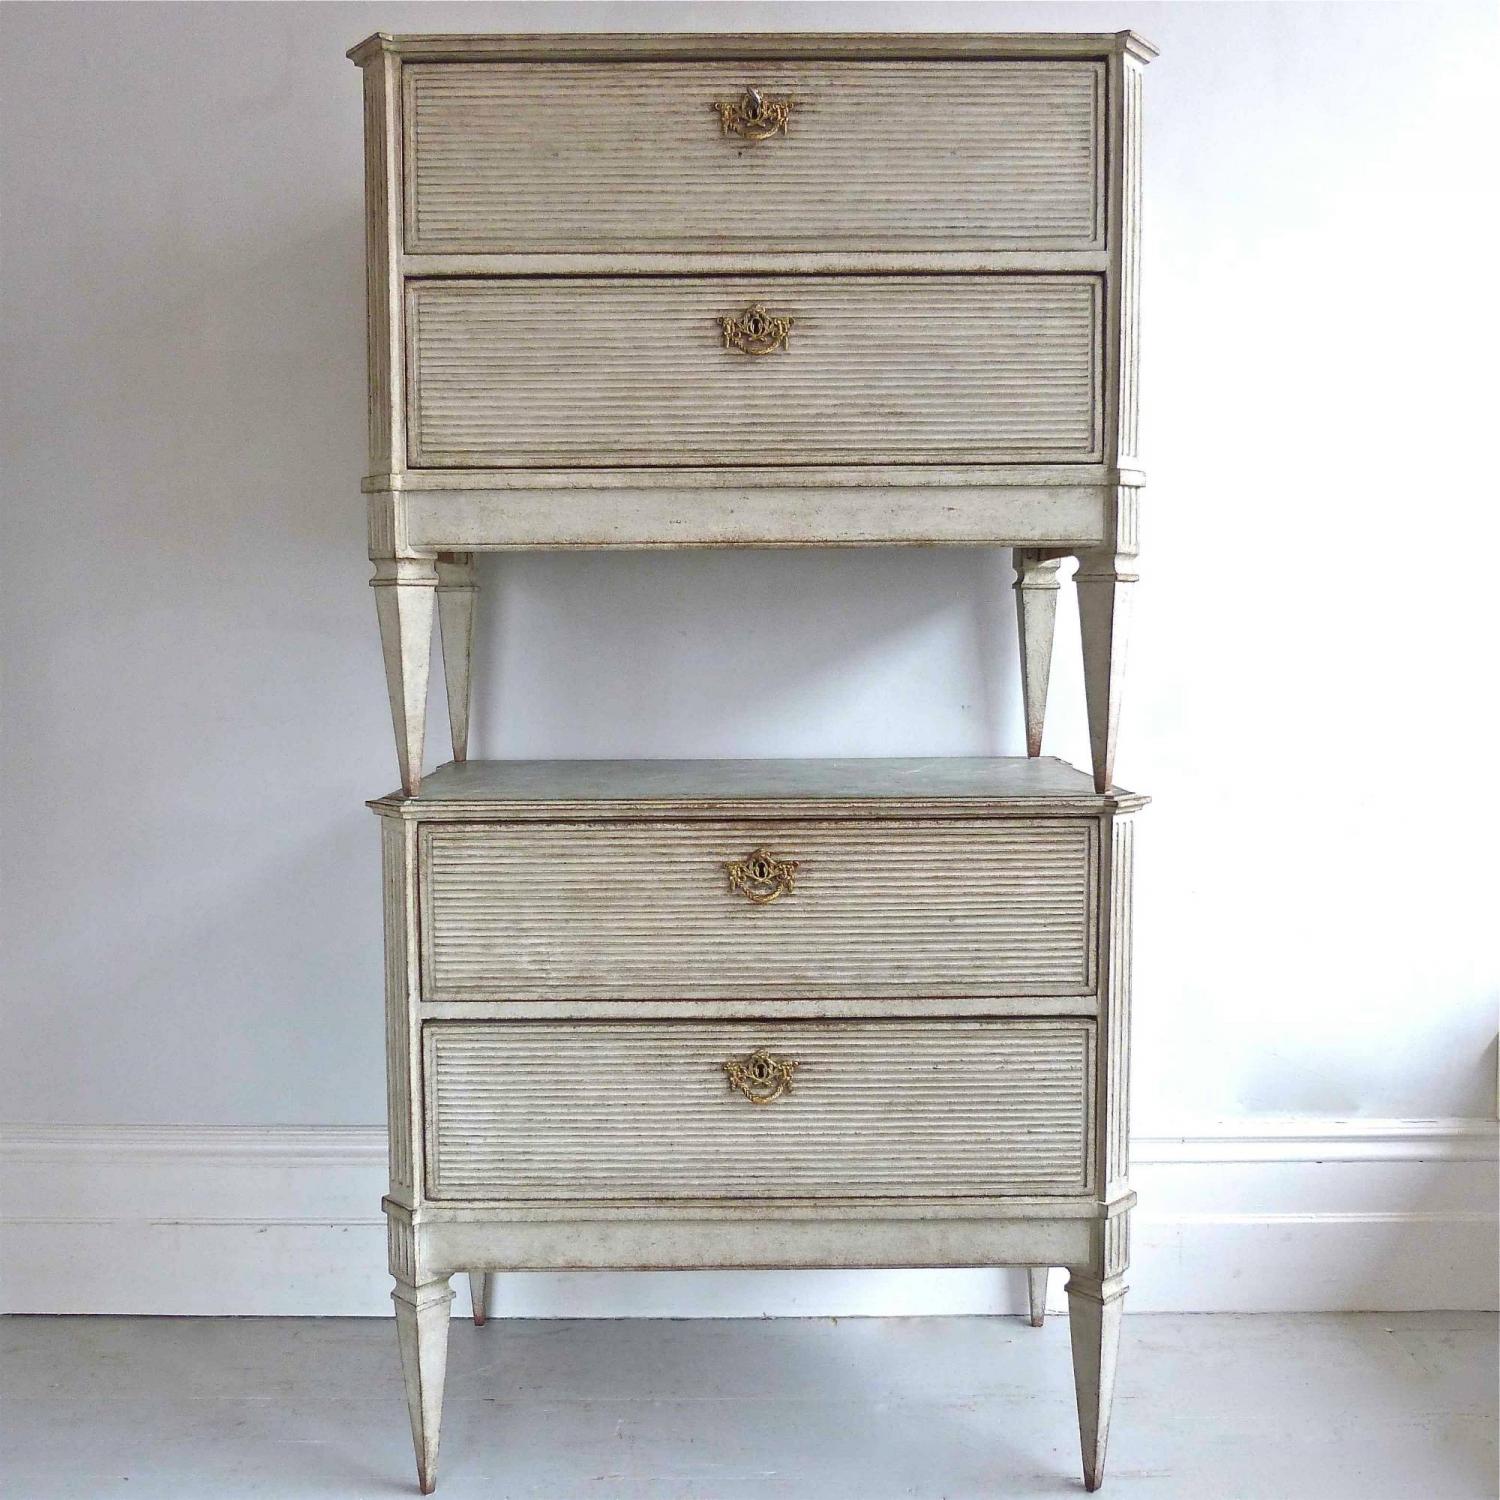 HANDSOME PAIR OF GUSTAVIAN STYLE BEDSIDE CHES